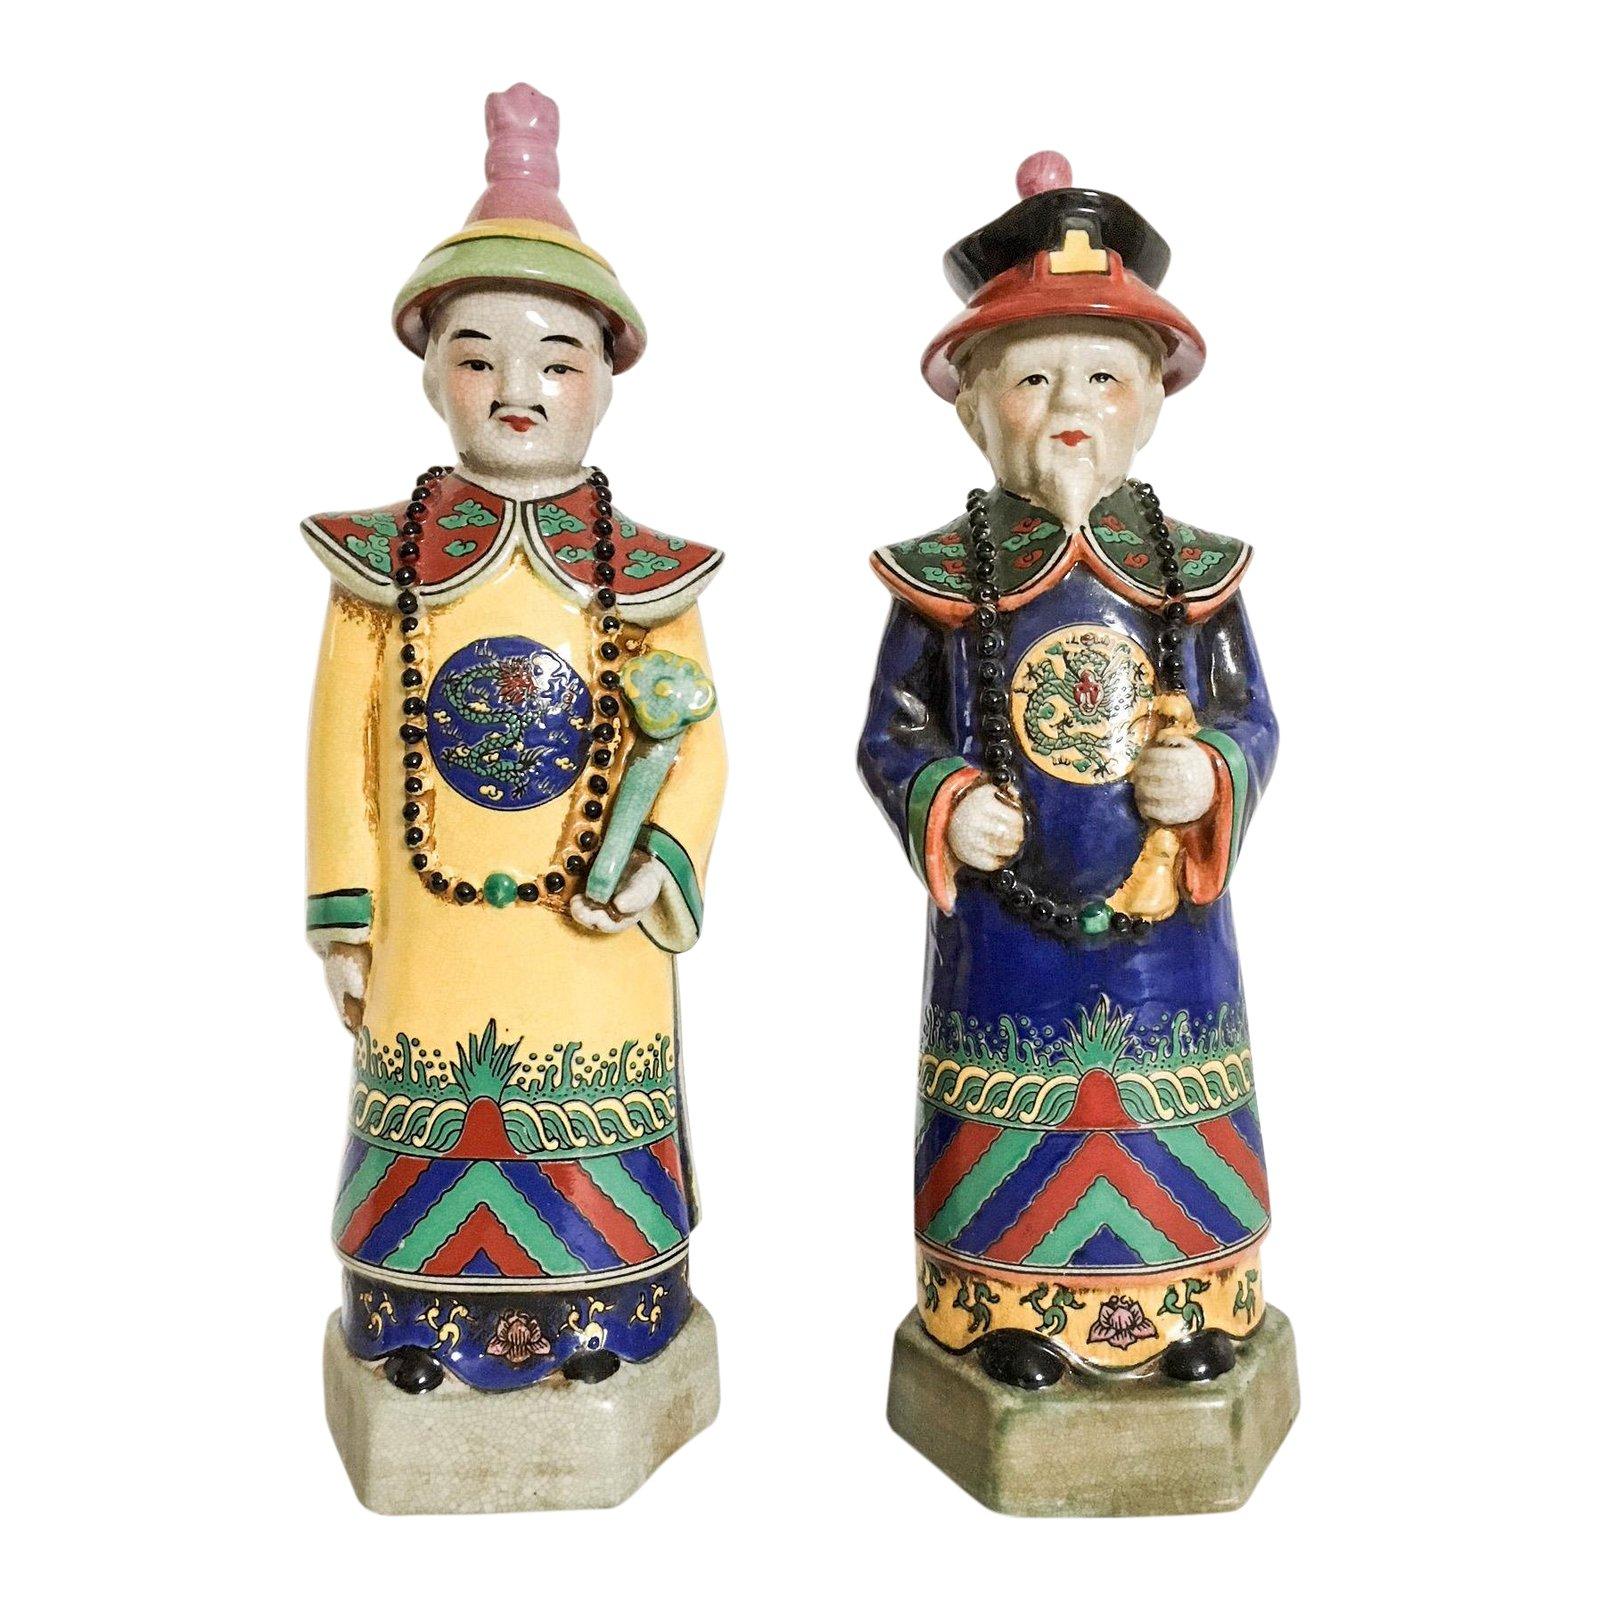 Polychrome Chinoiserie Emperor Statues, Pair